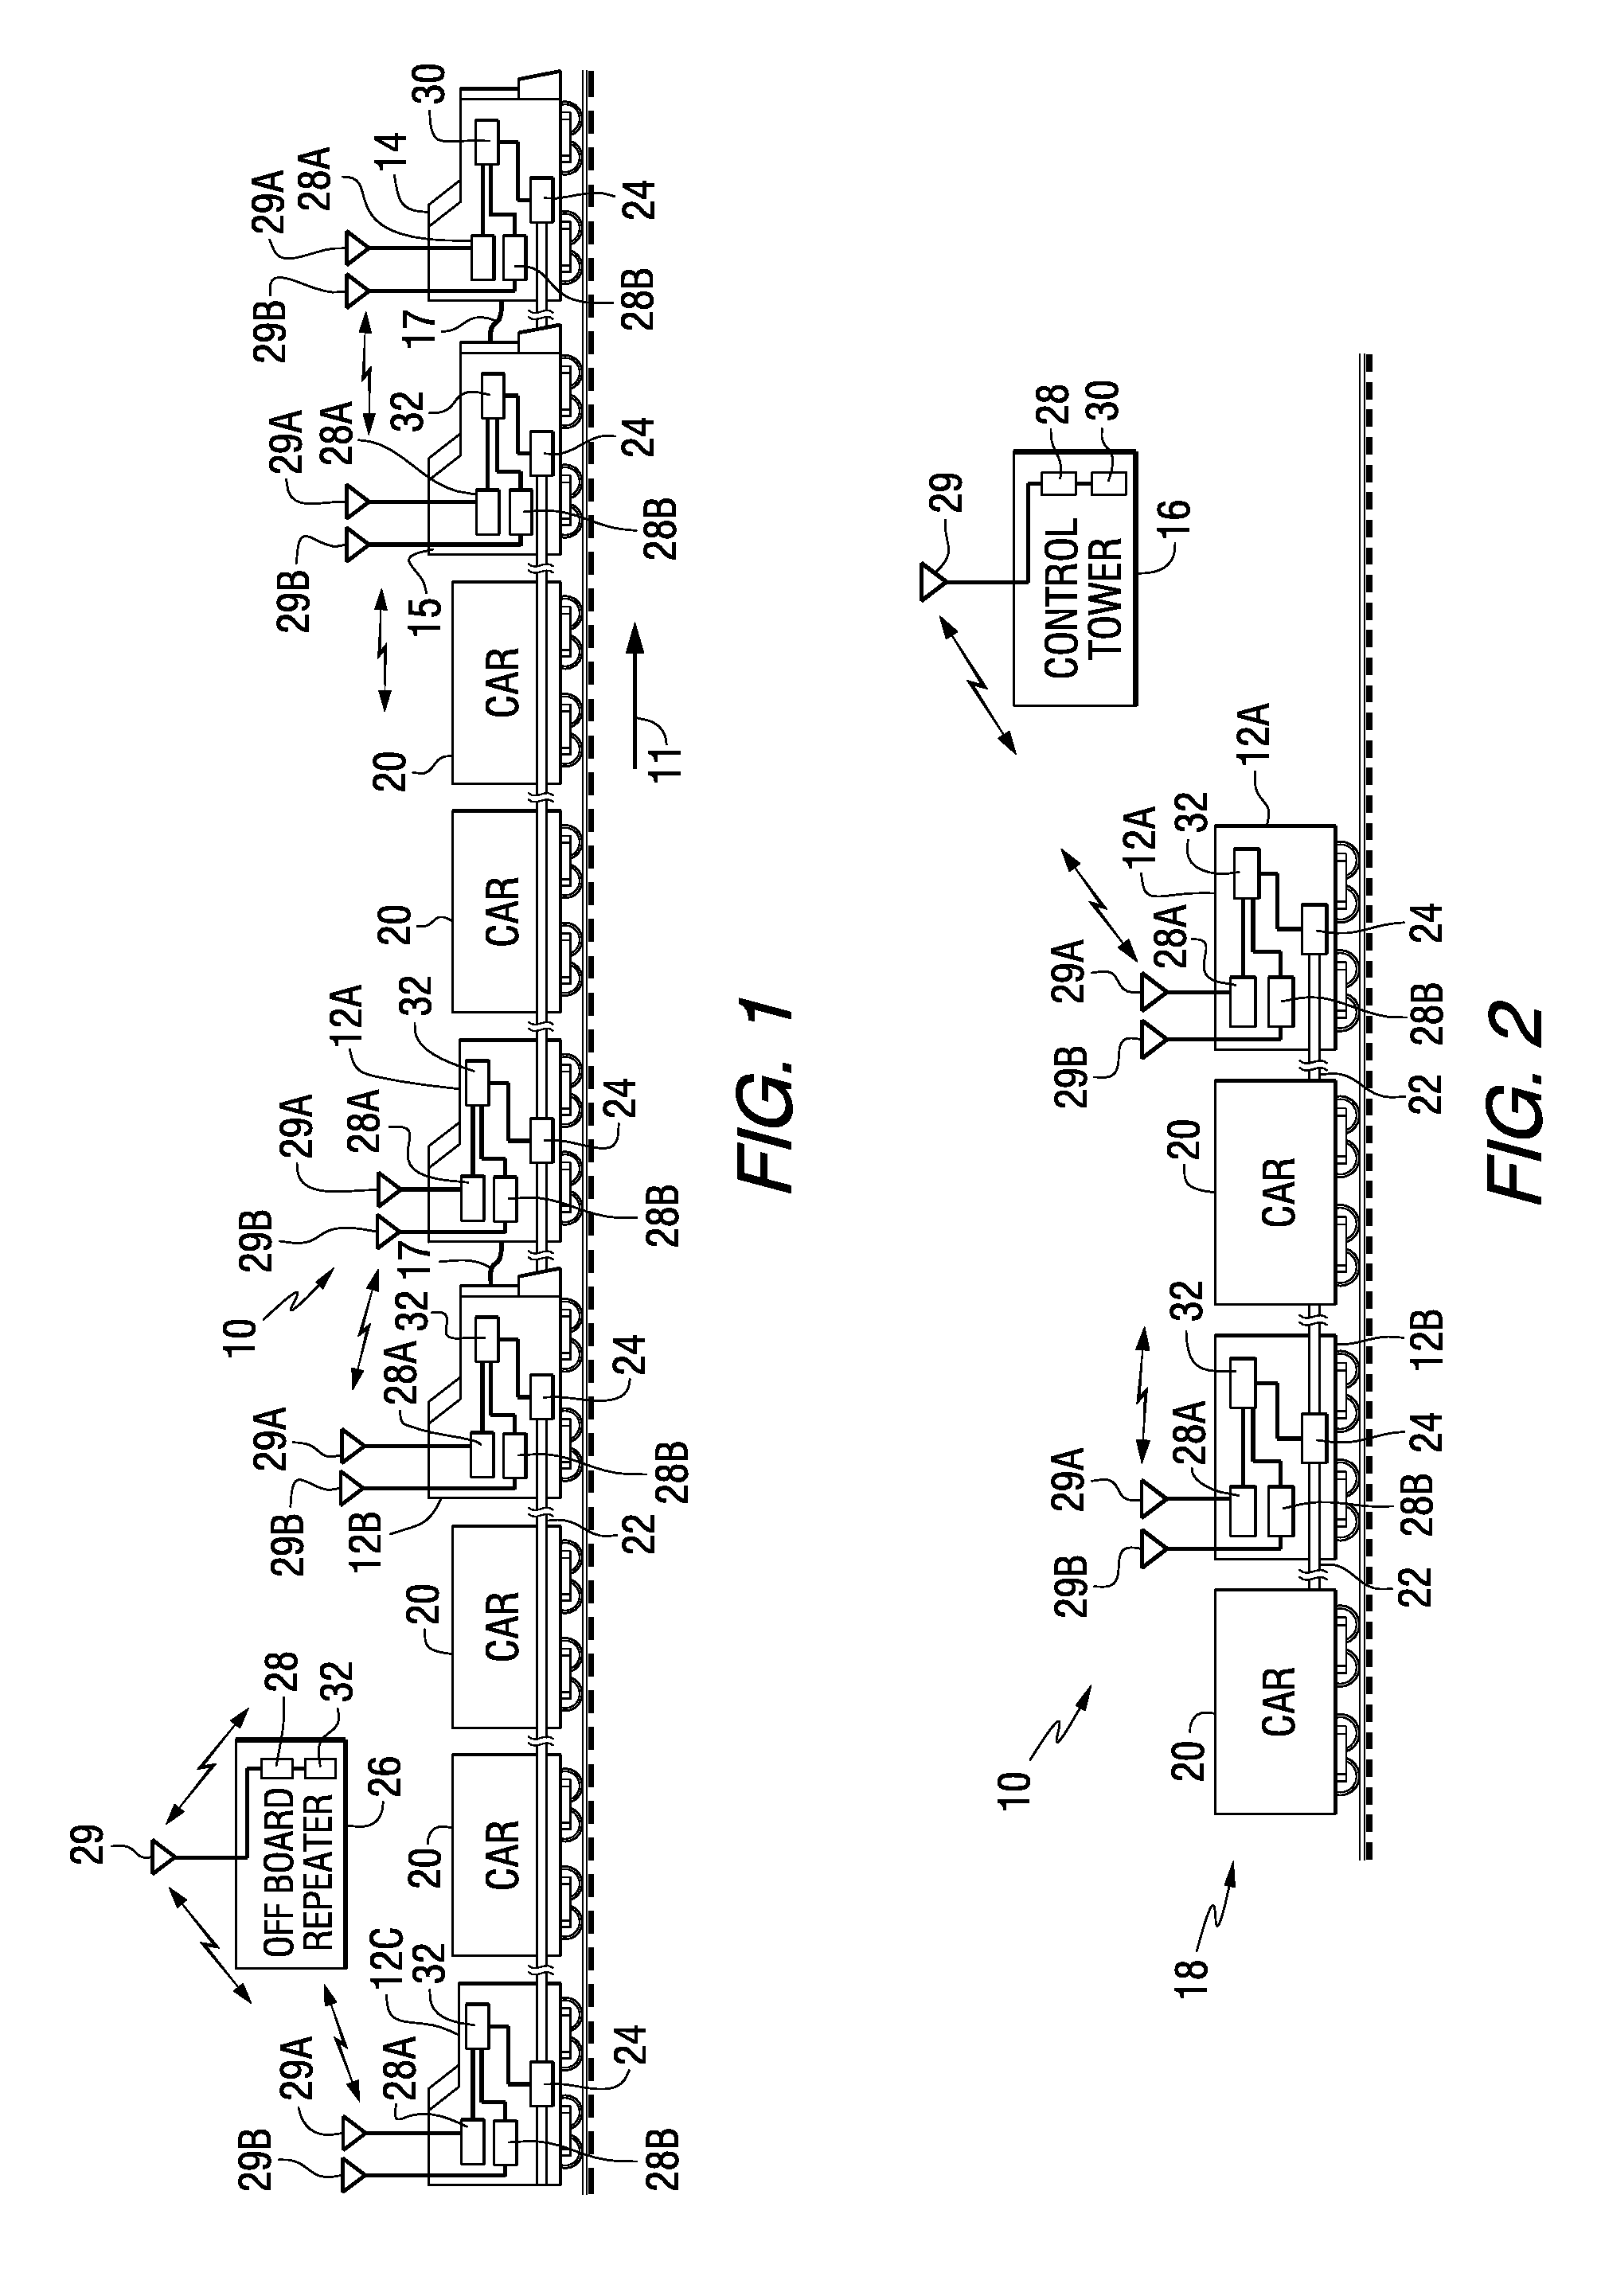 Method and apparatus related to on-board message repeating for vehicle consist communications system